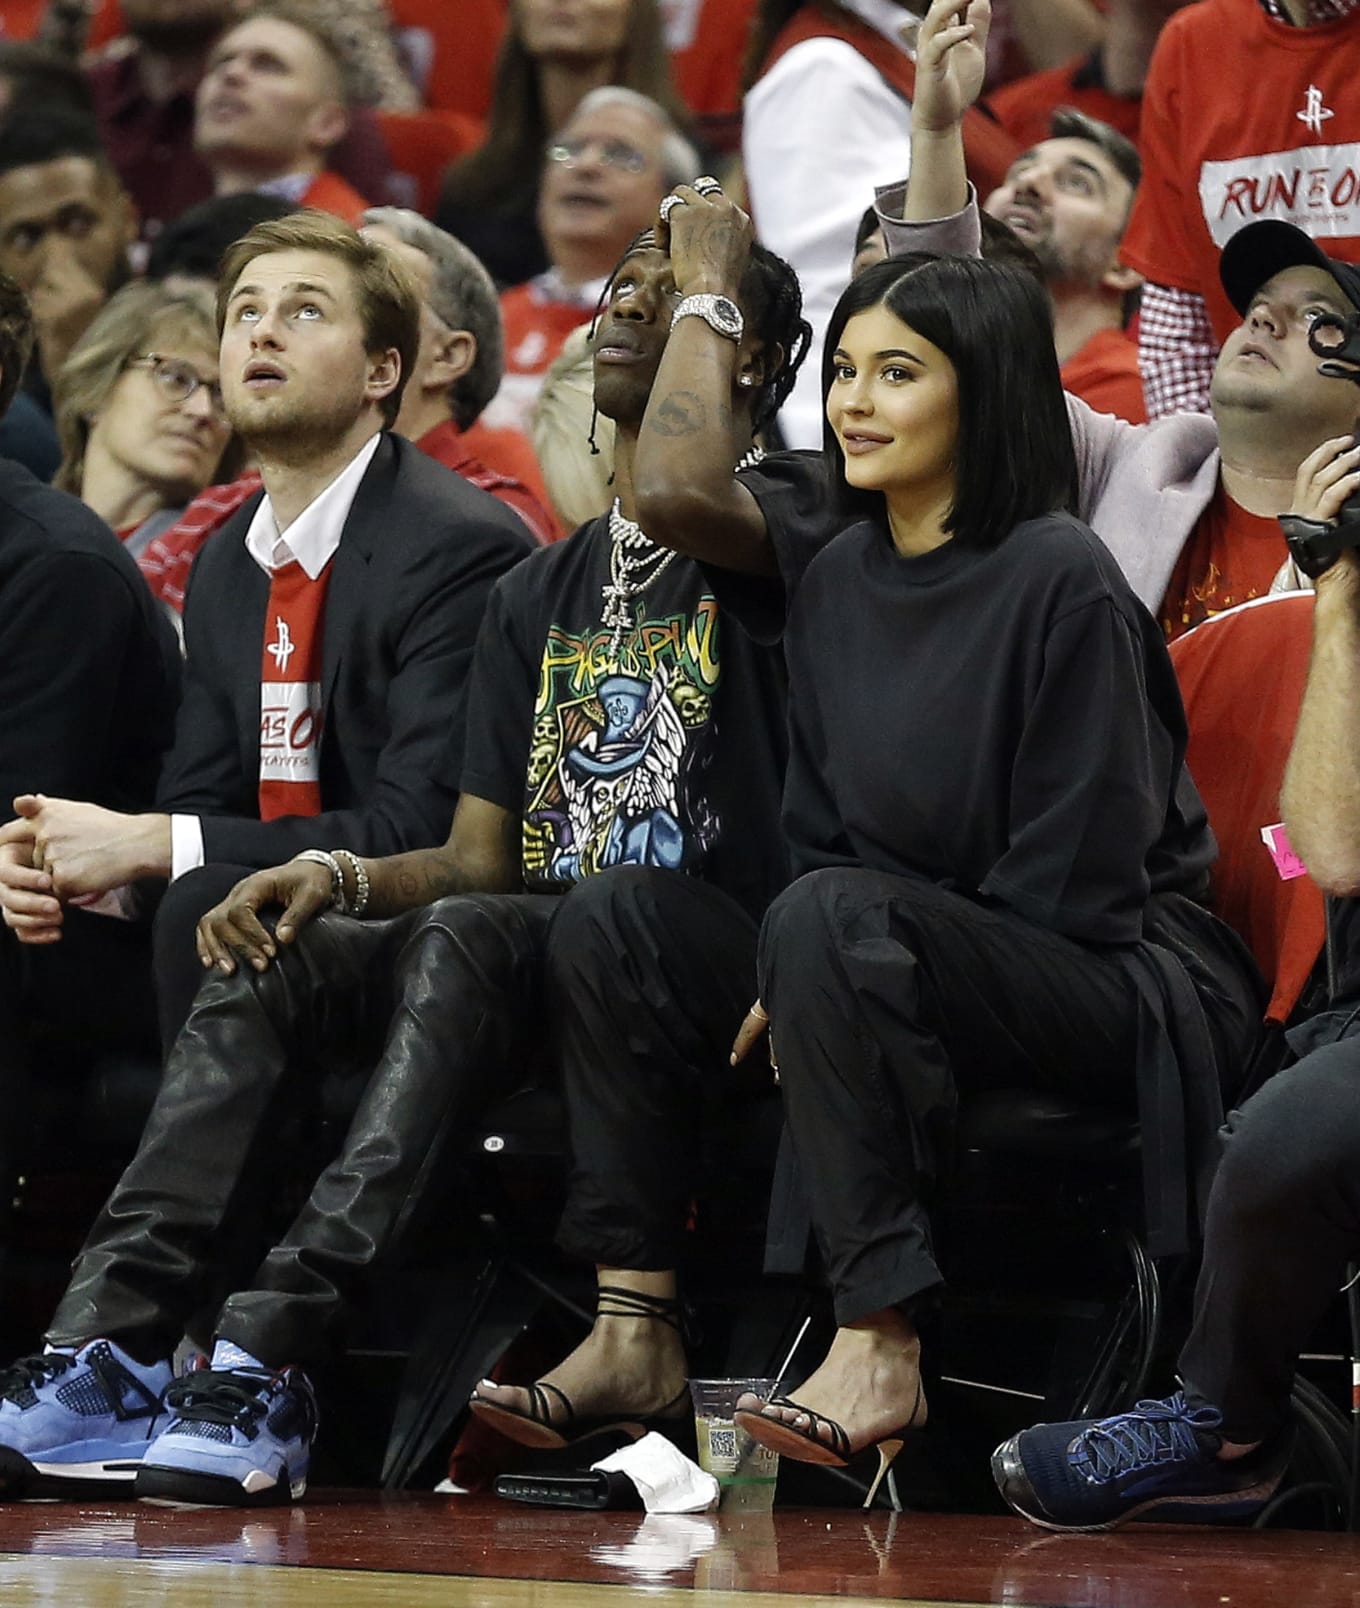 Travis His Jack' Air Jordan 4 Sneakers With Kylie Jenner | Sole Collector